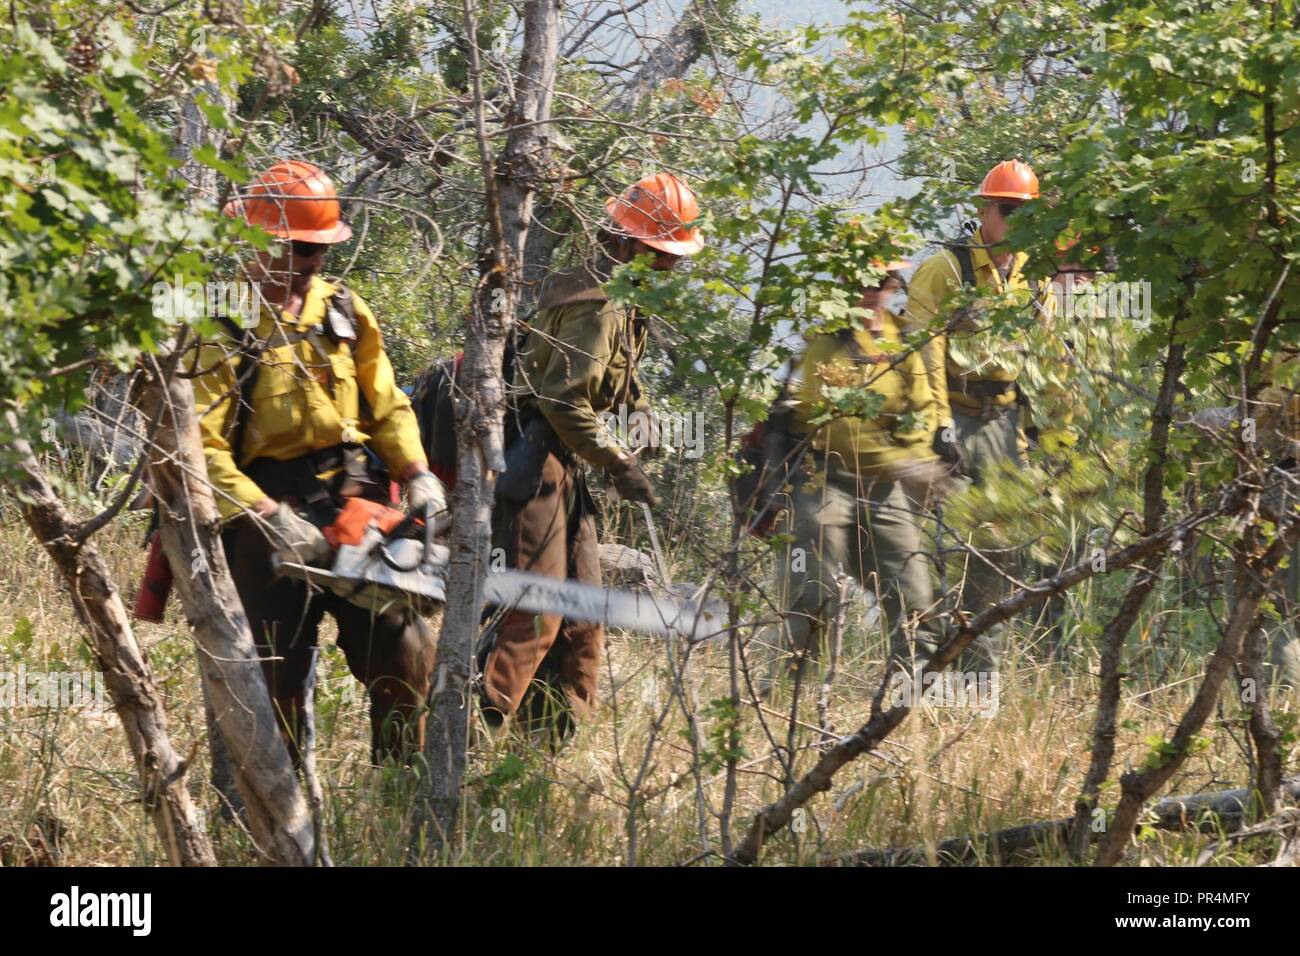 Combined forces of Bureau of Land Management, U.S Forest Service and other contractors work tirelessly to fight the fire that has burned across over 70,000 thousand acres of land Sep. 15, 2018 in Payson Canyon. Helicopters were used to aid the slowing of the lightning-caused fire. Stock Photo